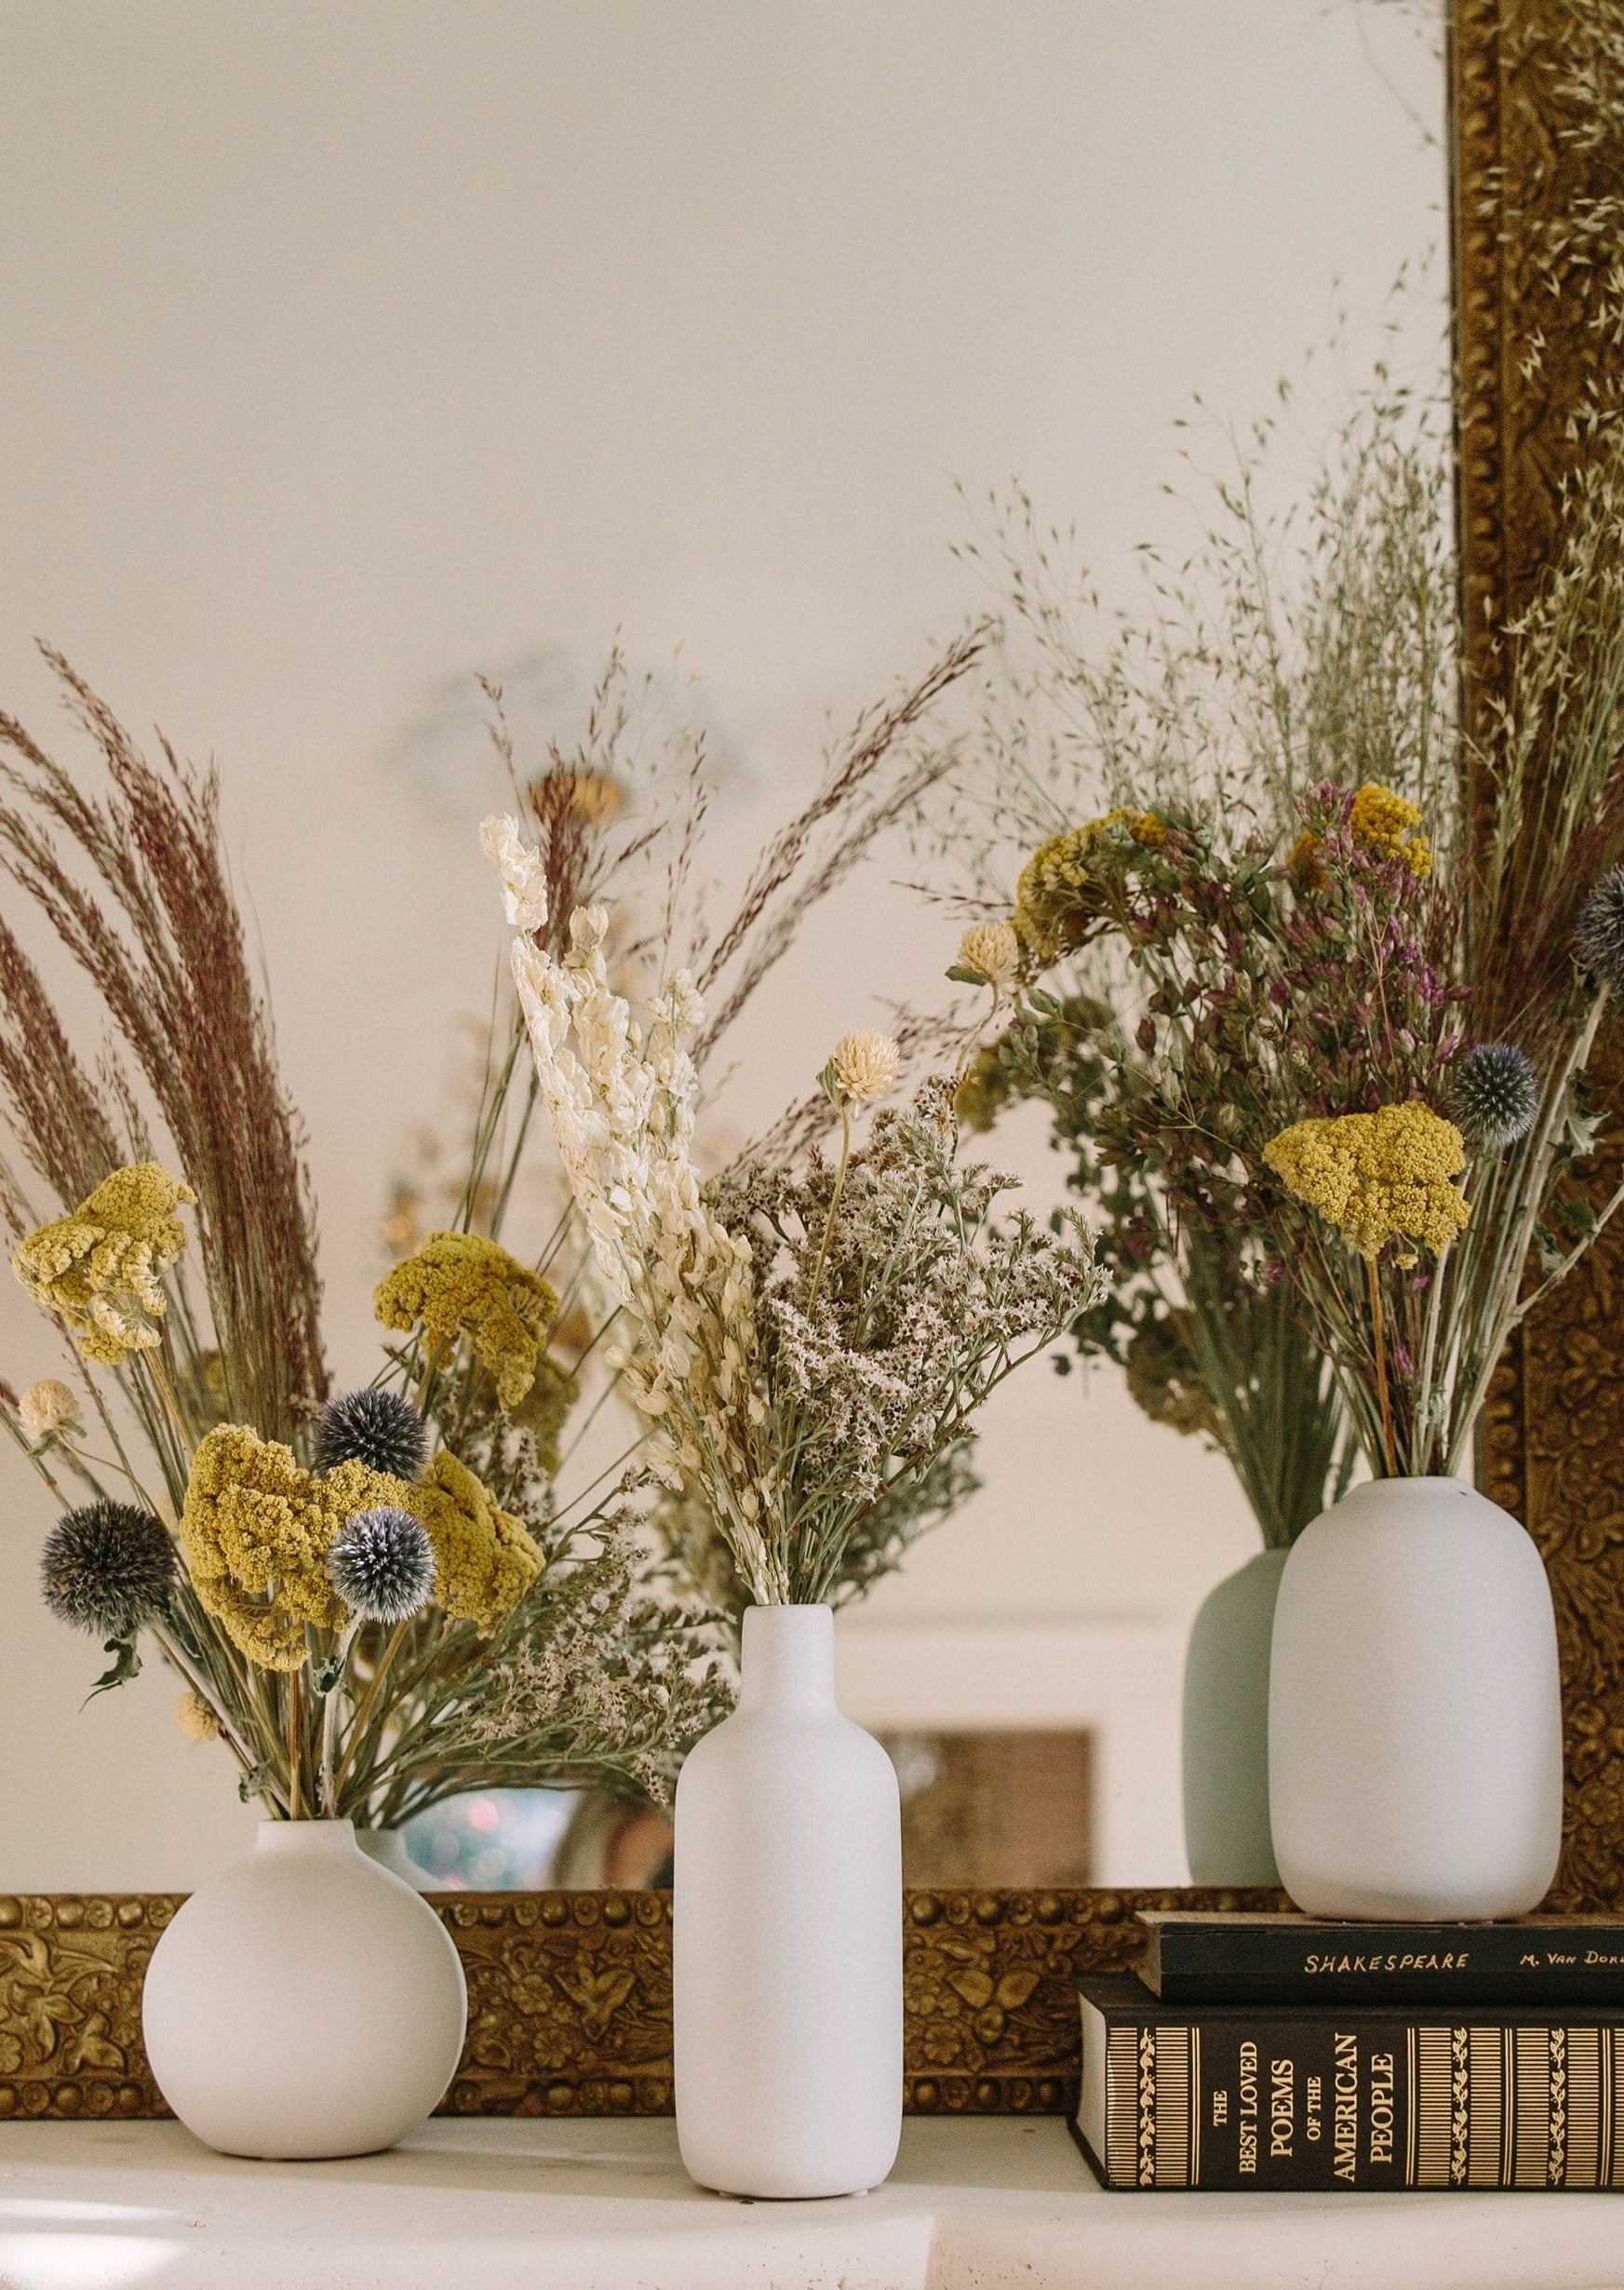 Natural Yellow Yarrow, Country Wedding Flowers